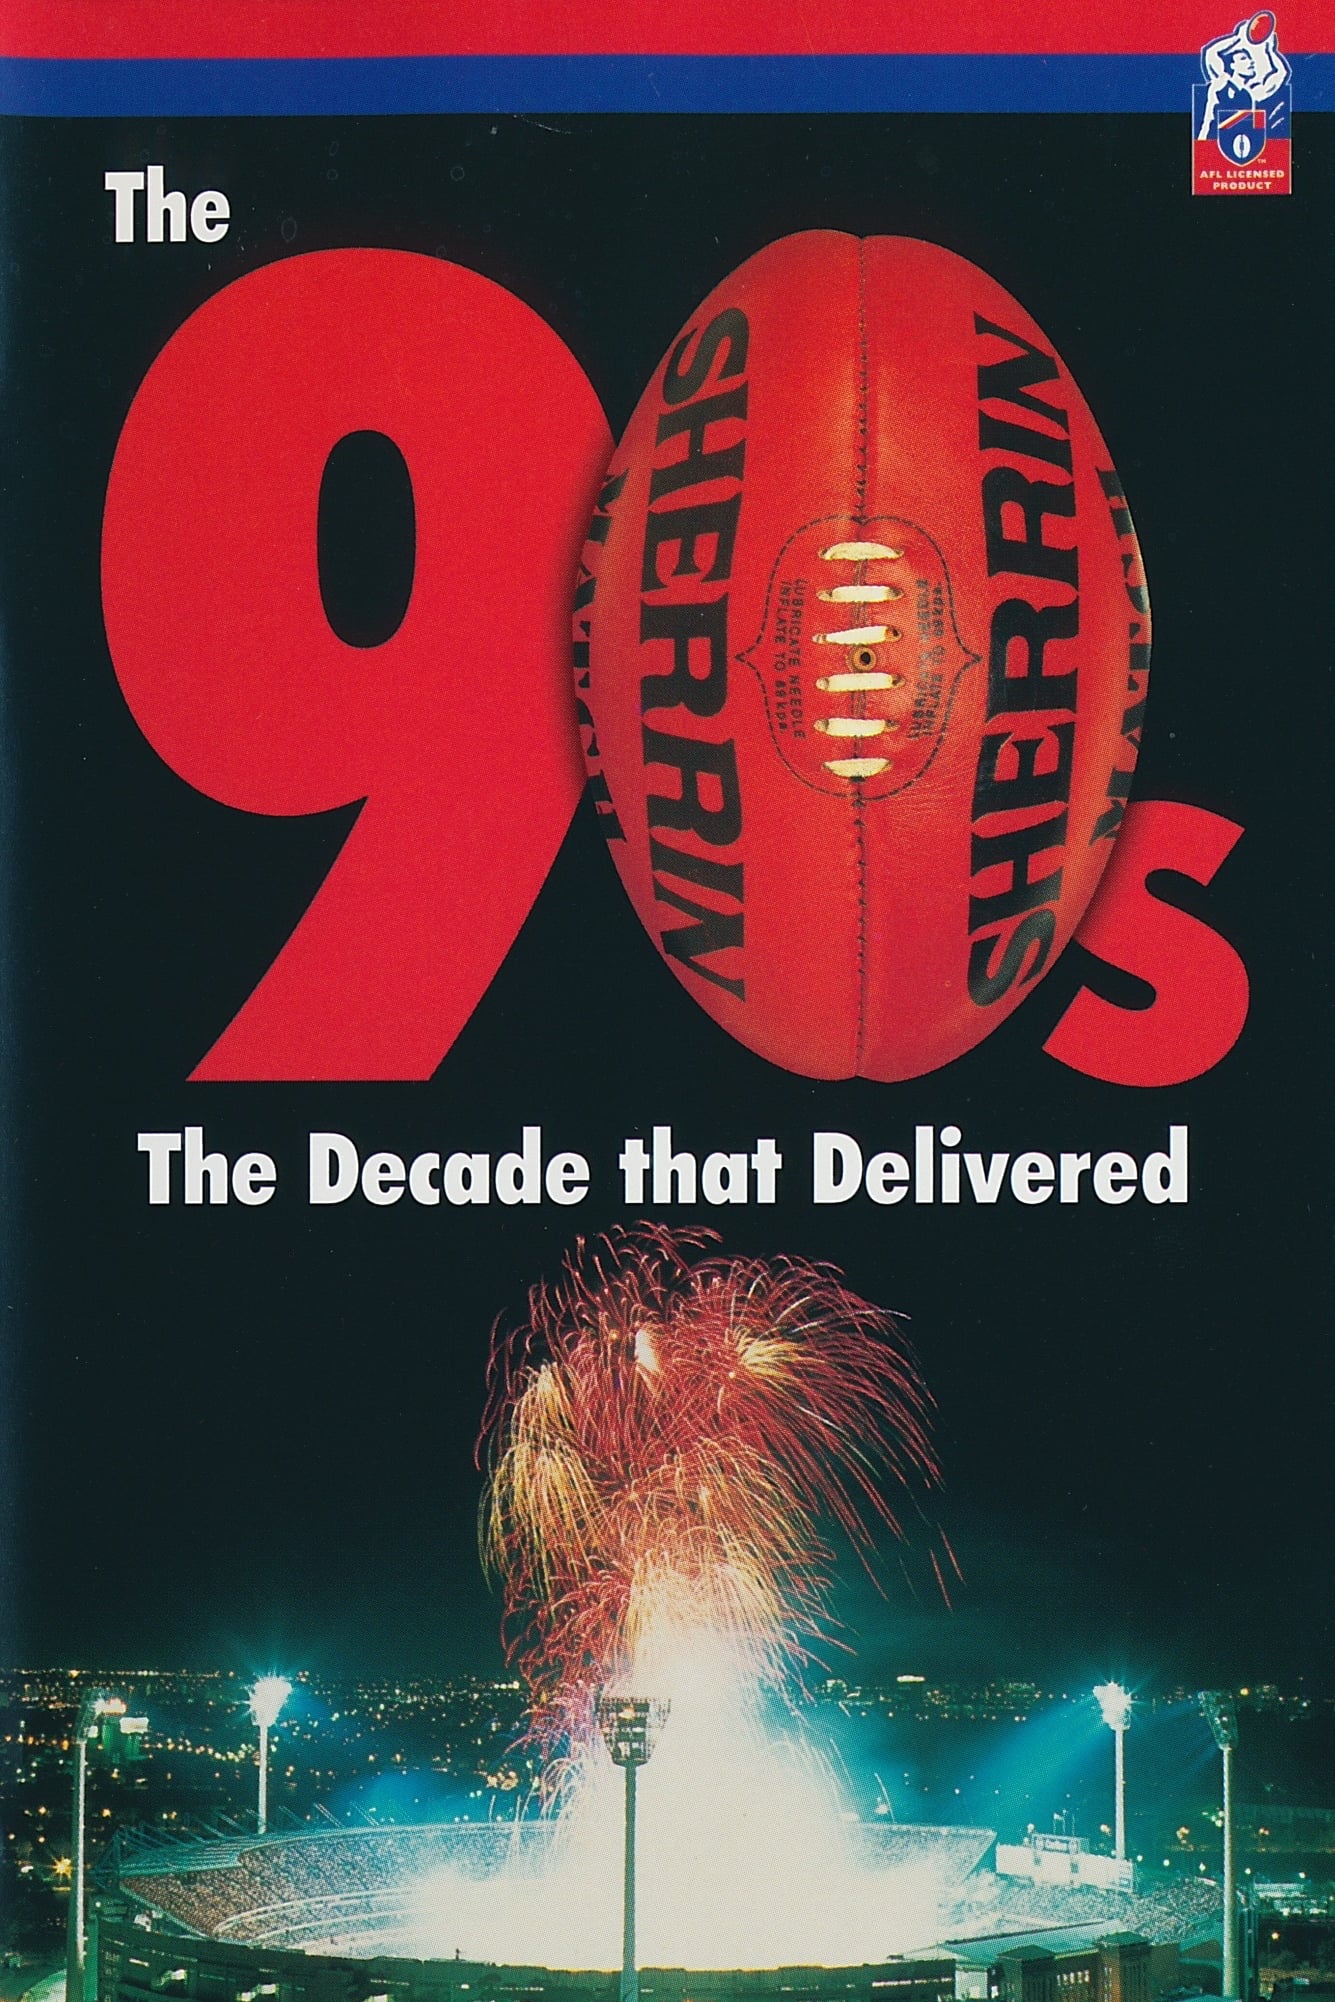 The 90s: The Decade that Delivered